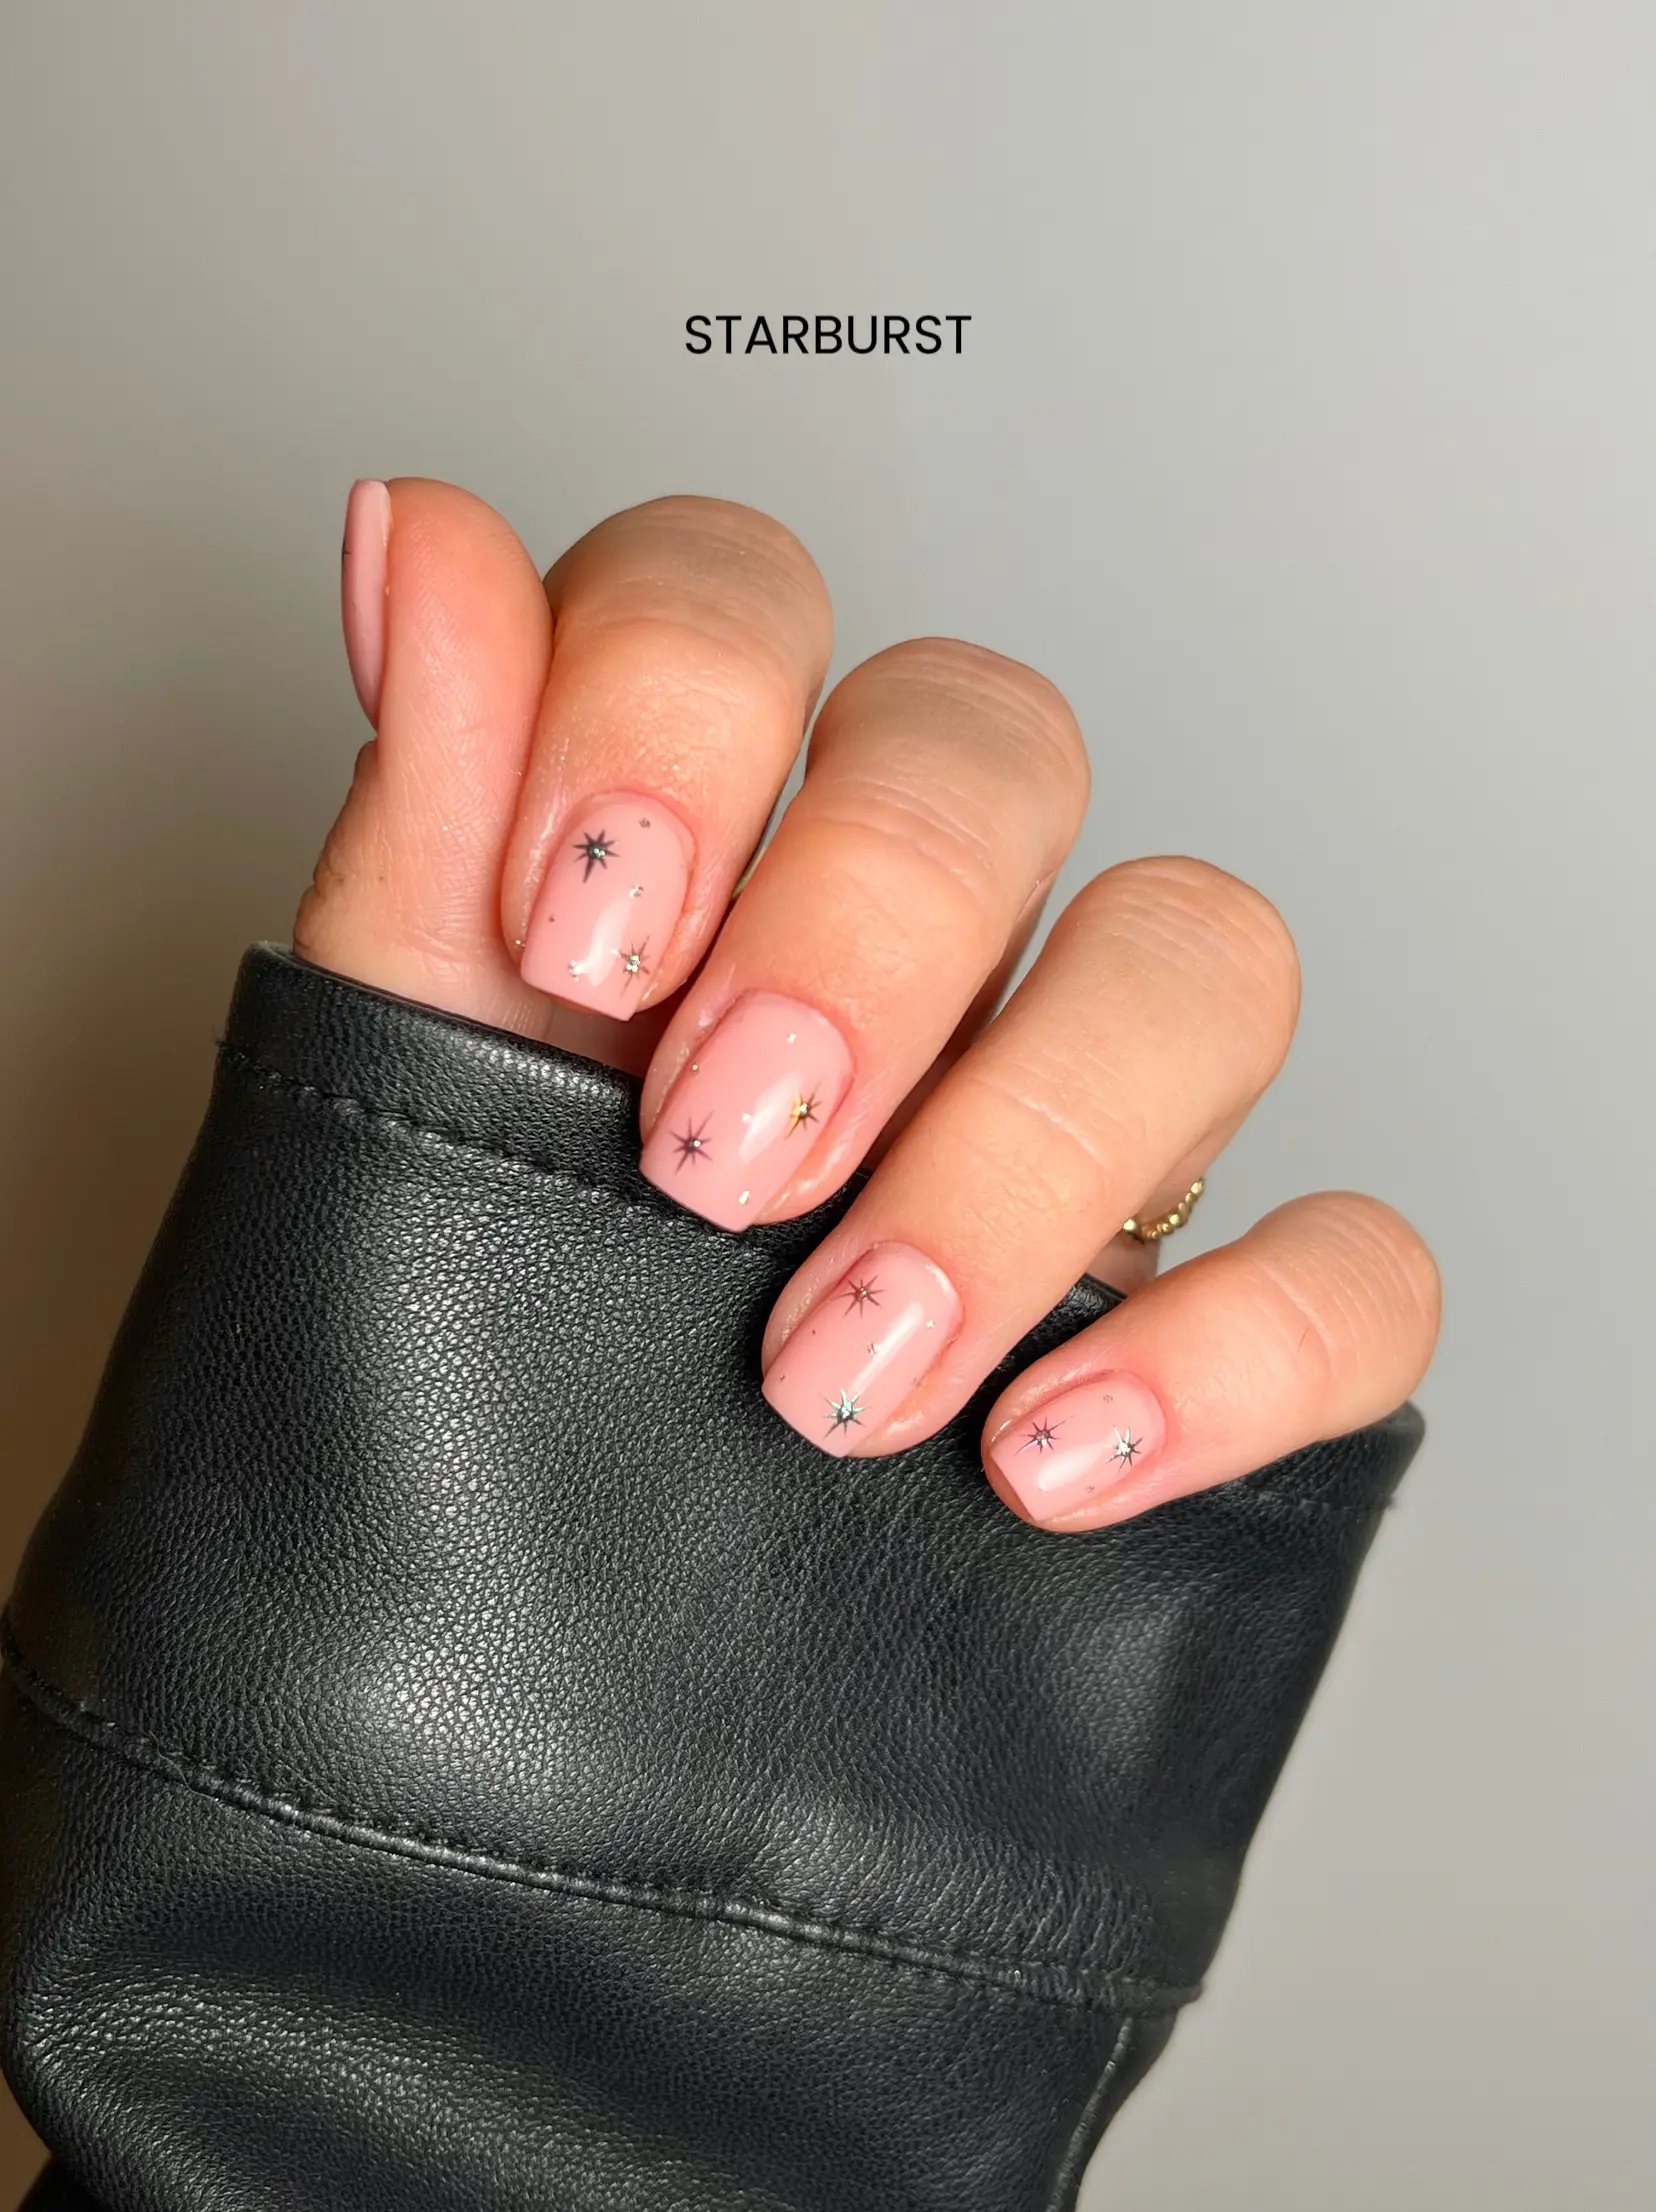 Chrome French Manicure ✨, Nail Art Inspo, Gallery posted by Leanne  Haycock